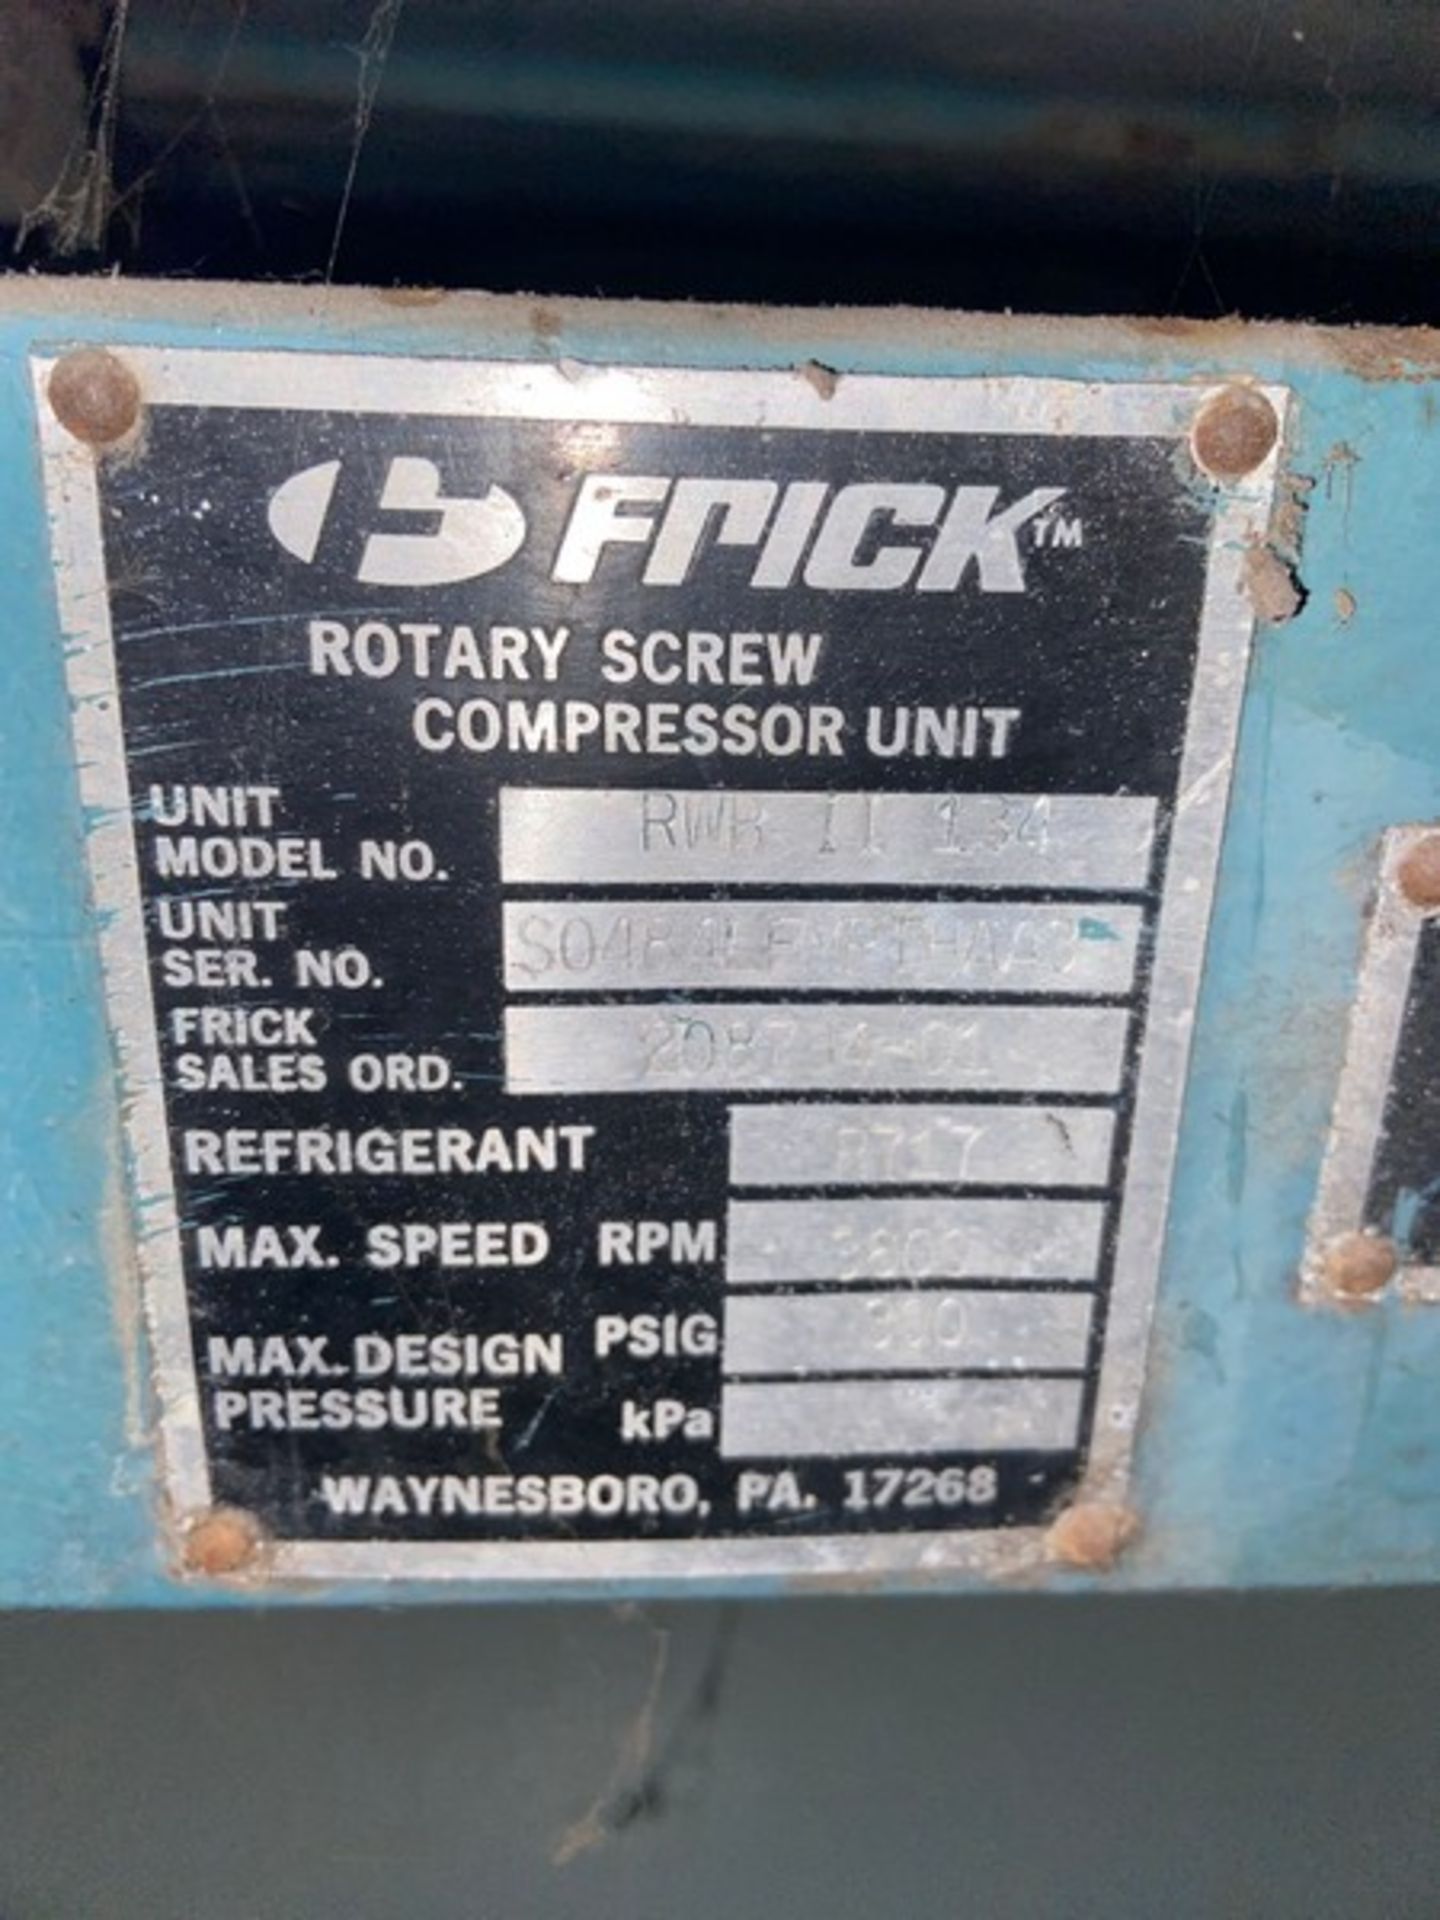 Frick 300 hp Rotary Screw Compressor, M/N TDSH193L1751D, Refrigerant NH3/R22, with 4500 Max. Speed R - Image 4 of 12